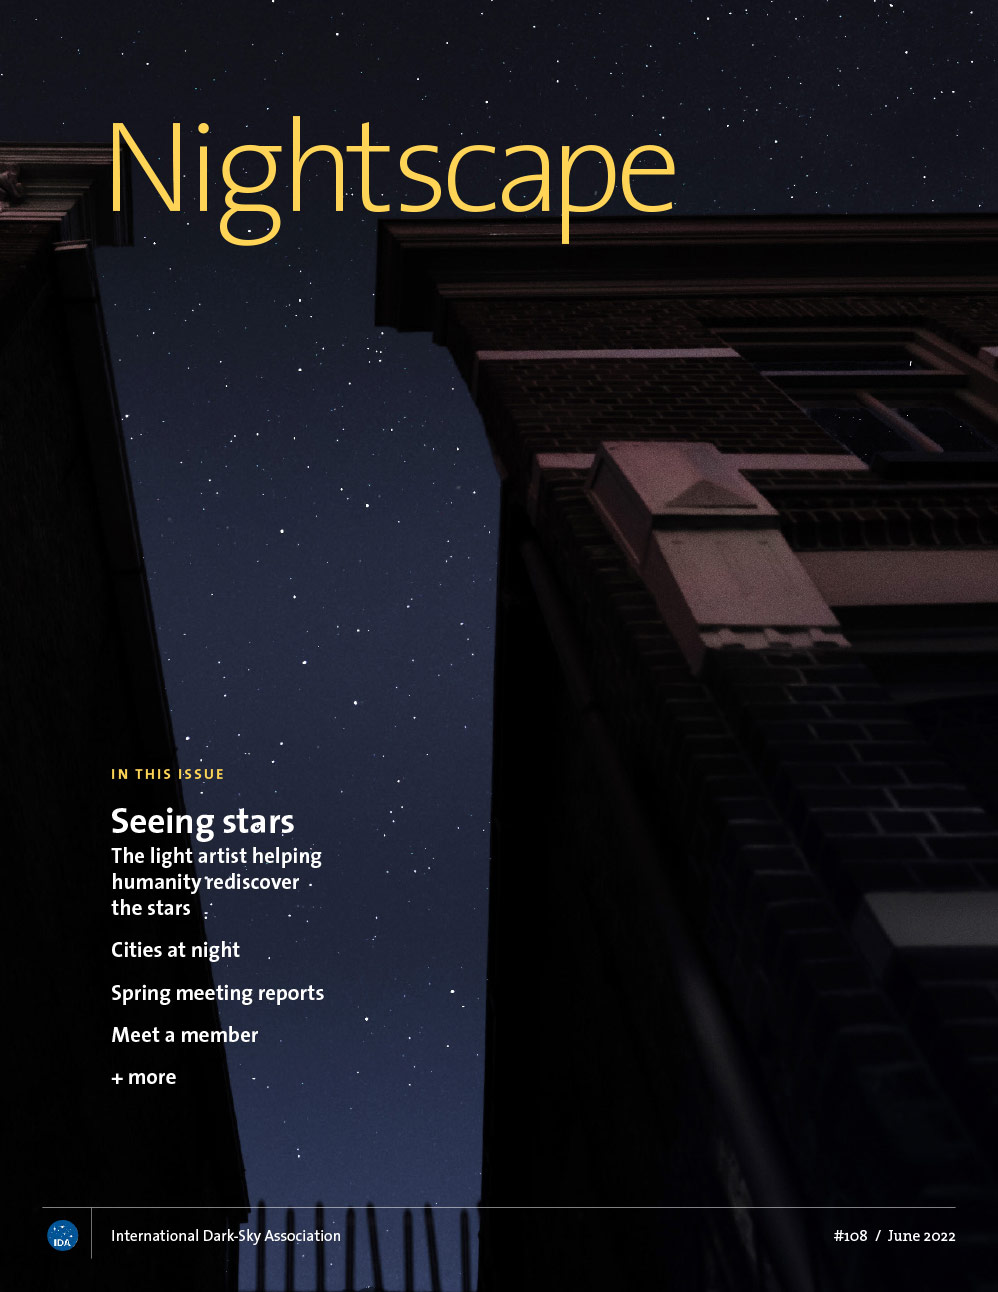 Cover of Nightscape magazine, June 2022 issue, showing a darkened building and stars in a night sky above it